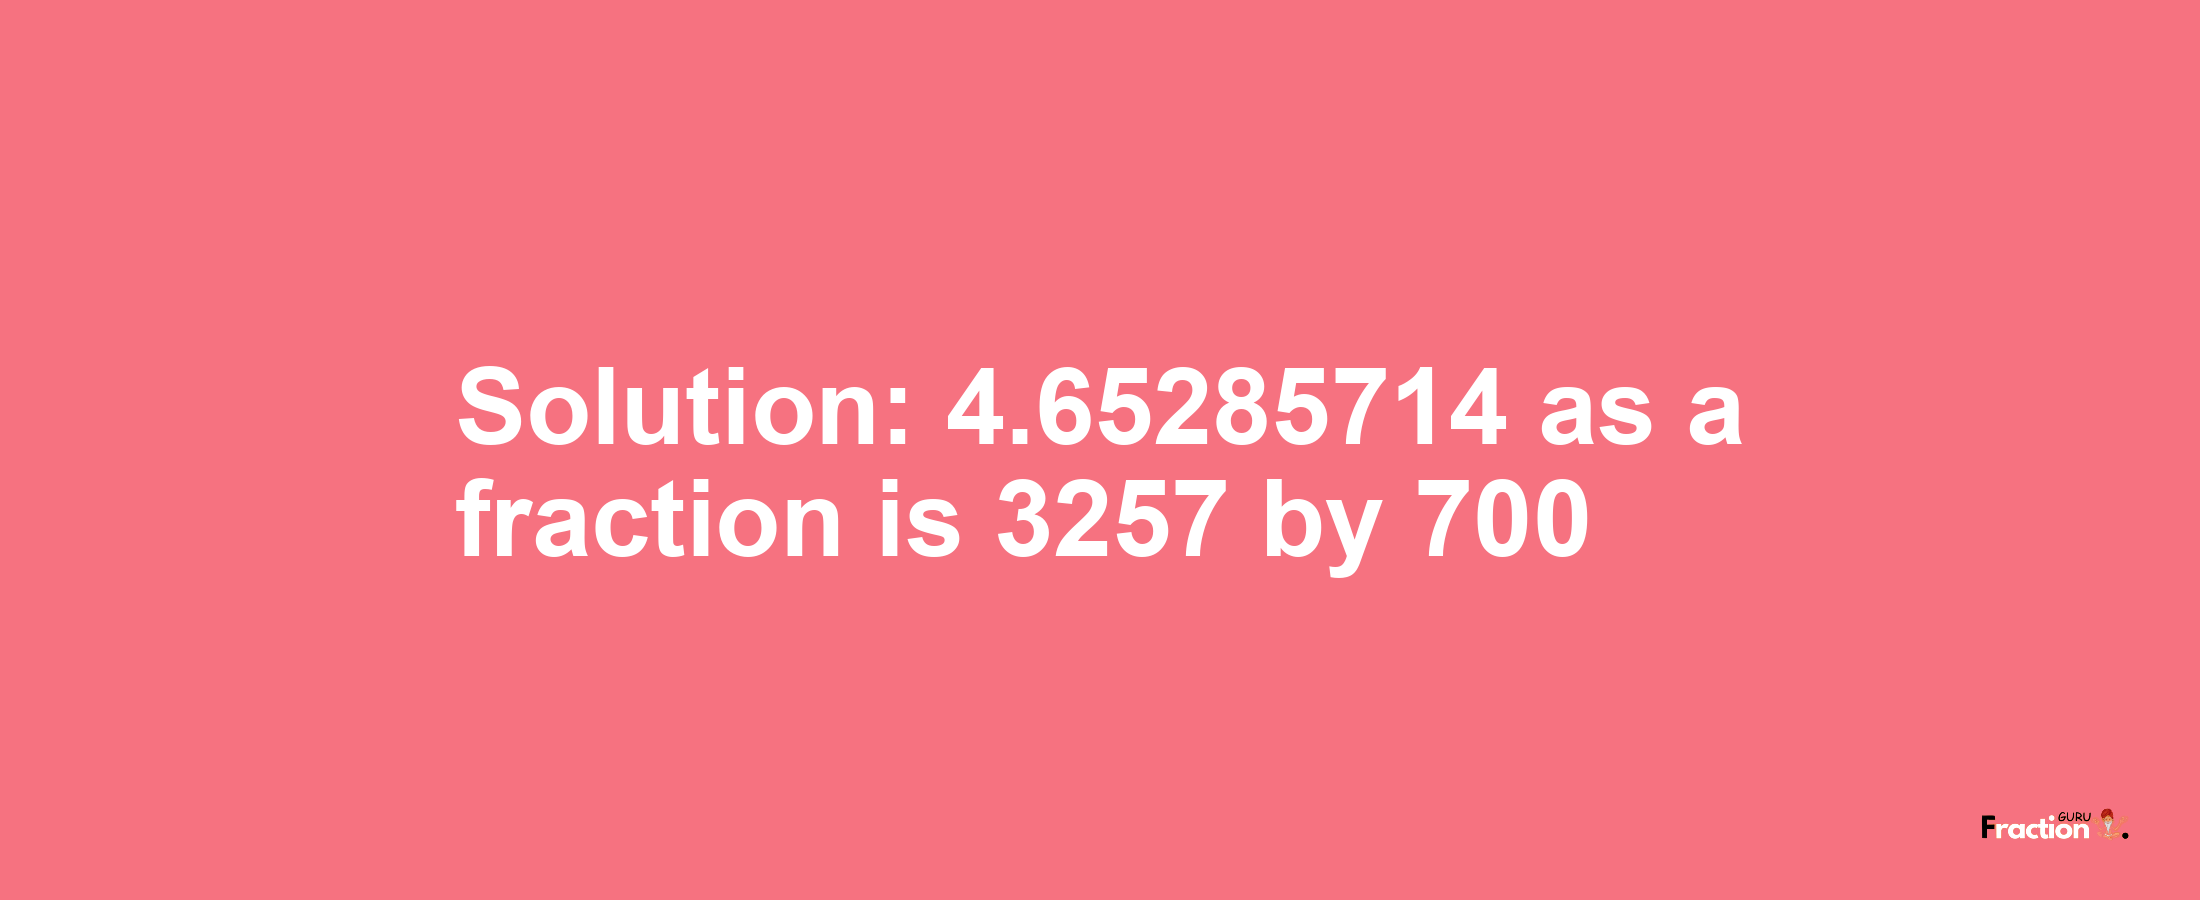 Solution:4.65285714 as a fraction is 3257/700